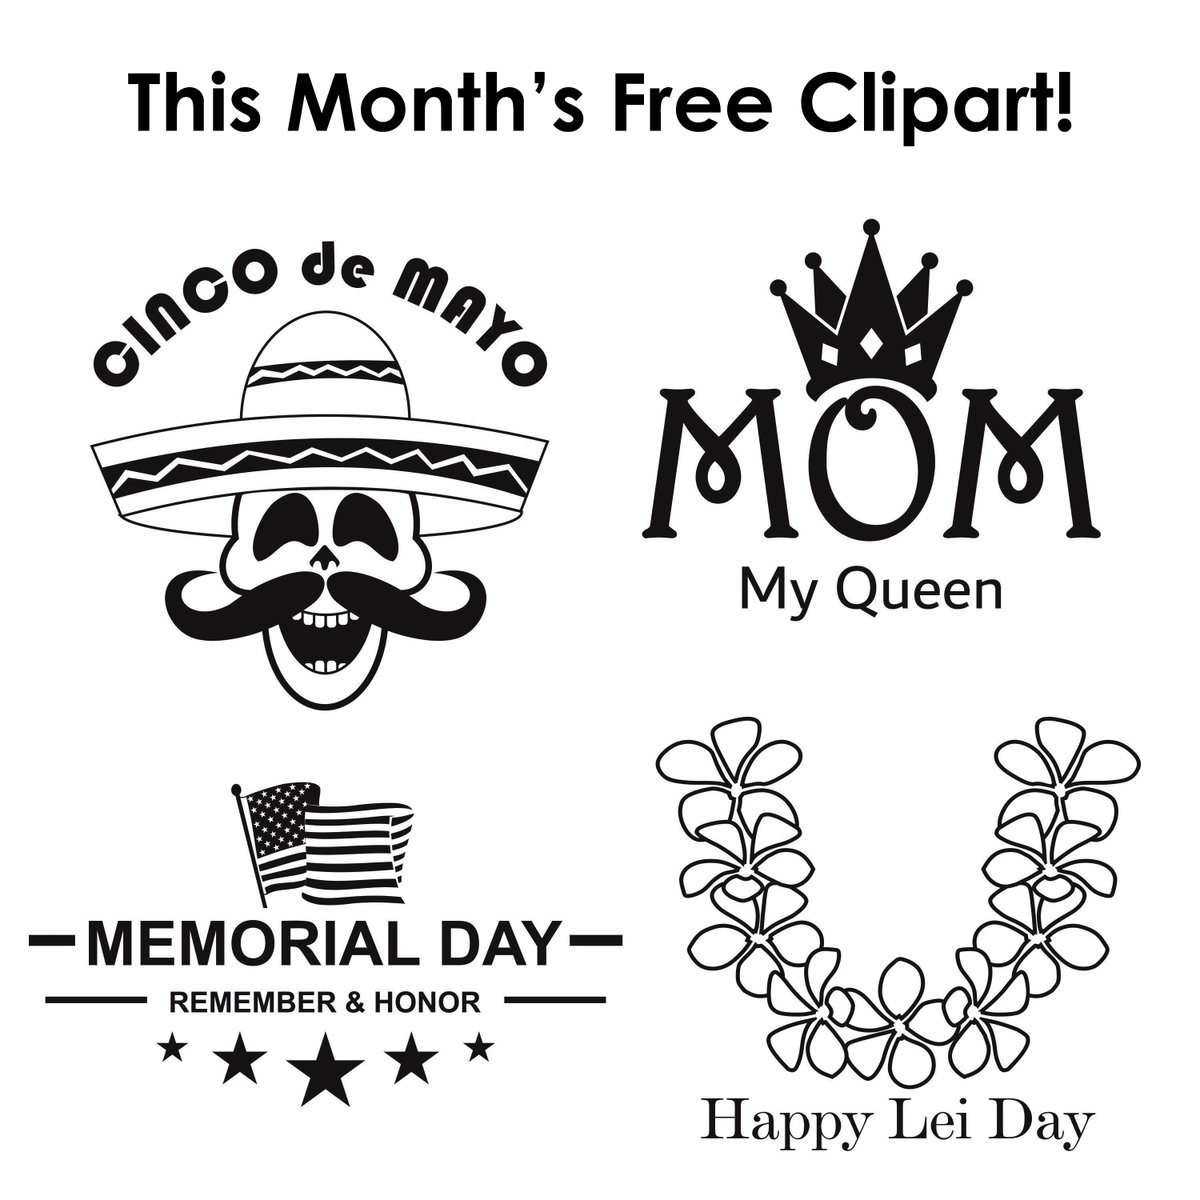 Vision's Free April #clipart #cincodemayo, #mommyqueen, #MemorialDay, & #leiday graphics in a variety of file formats.

Click link to download visionengravers.com/support/vision…

#freeclipart #engravingart #cncrouter #freegraphics #visionengravers #visionrouters #madeinusa  #madewithvision